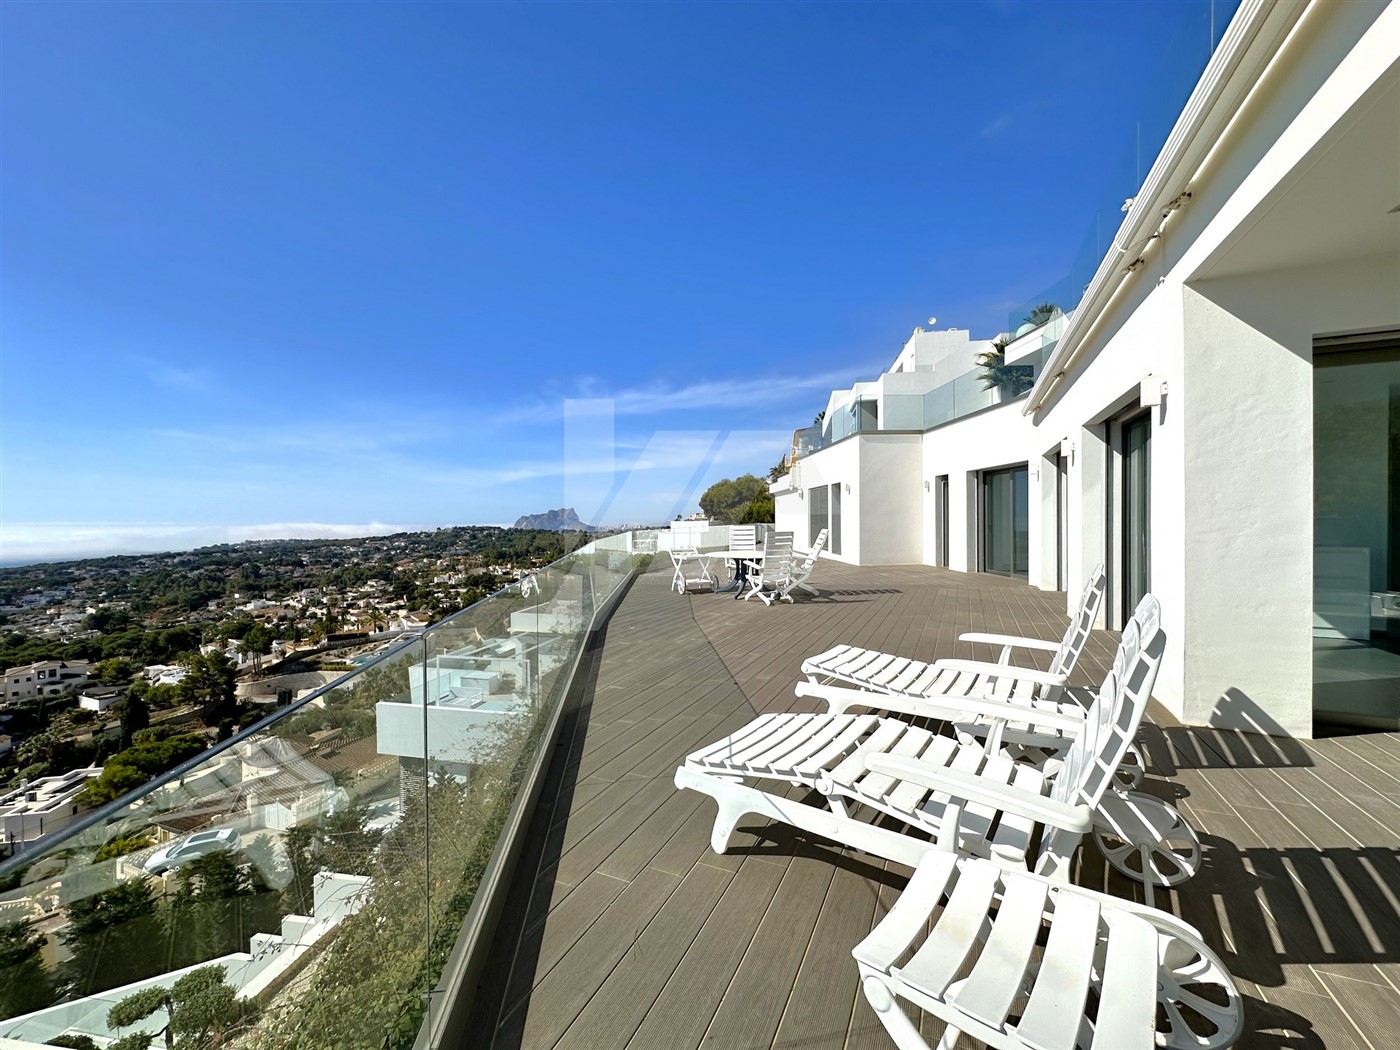 Exclusive villa for sale with unparalleled views of the Mediterranean Sea in Moraira.